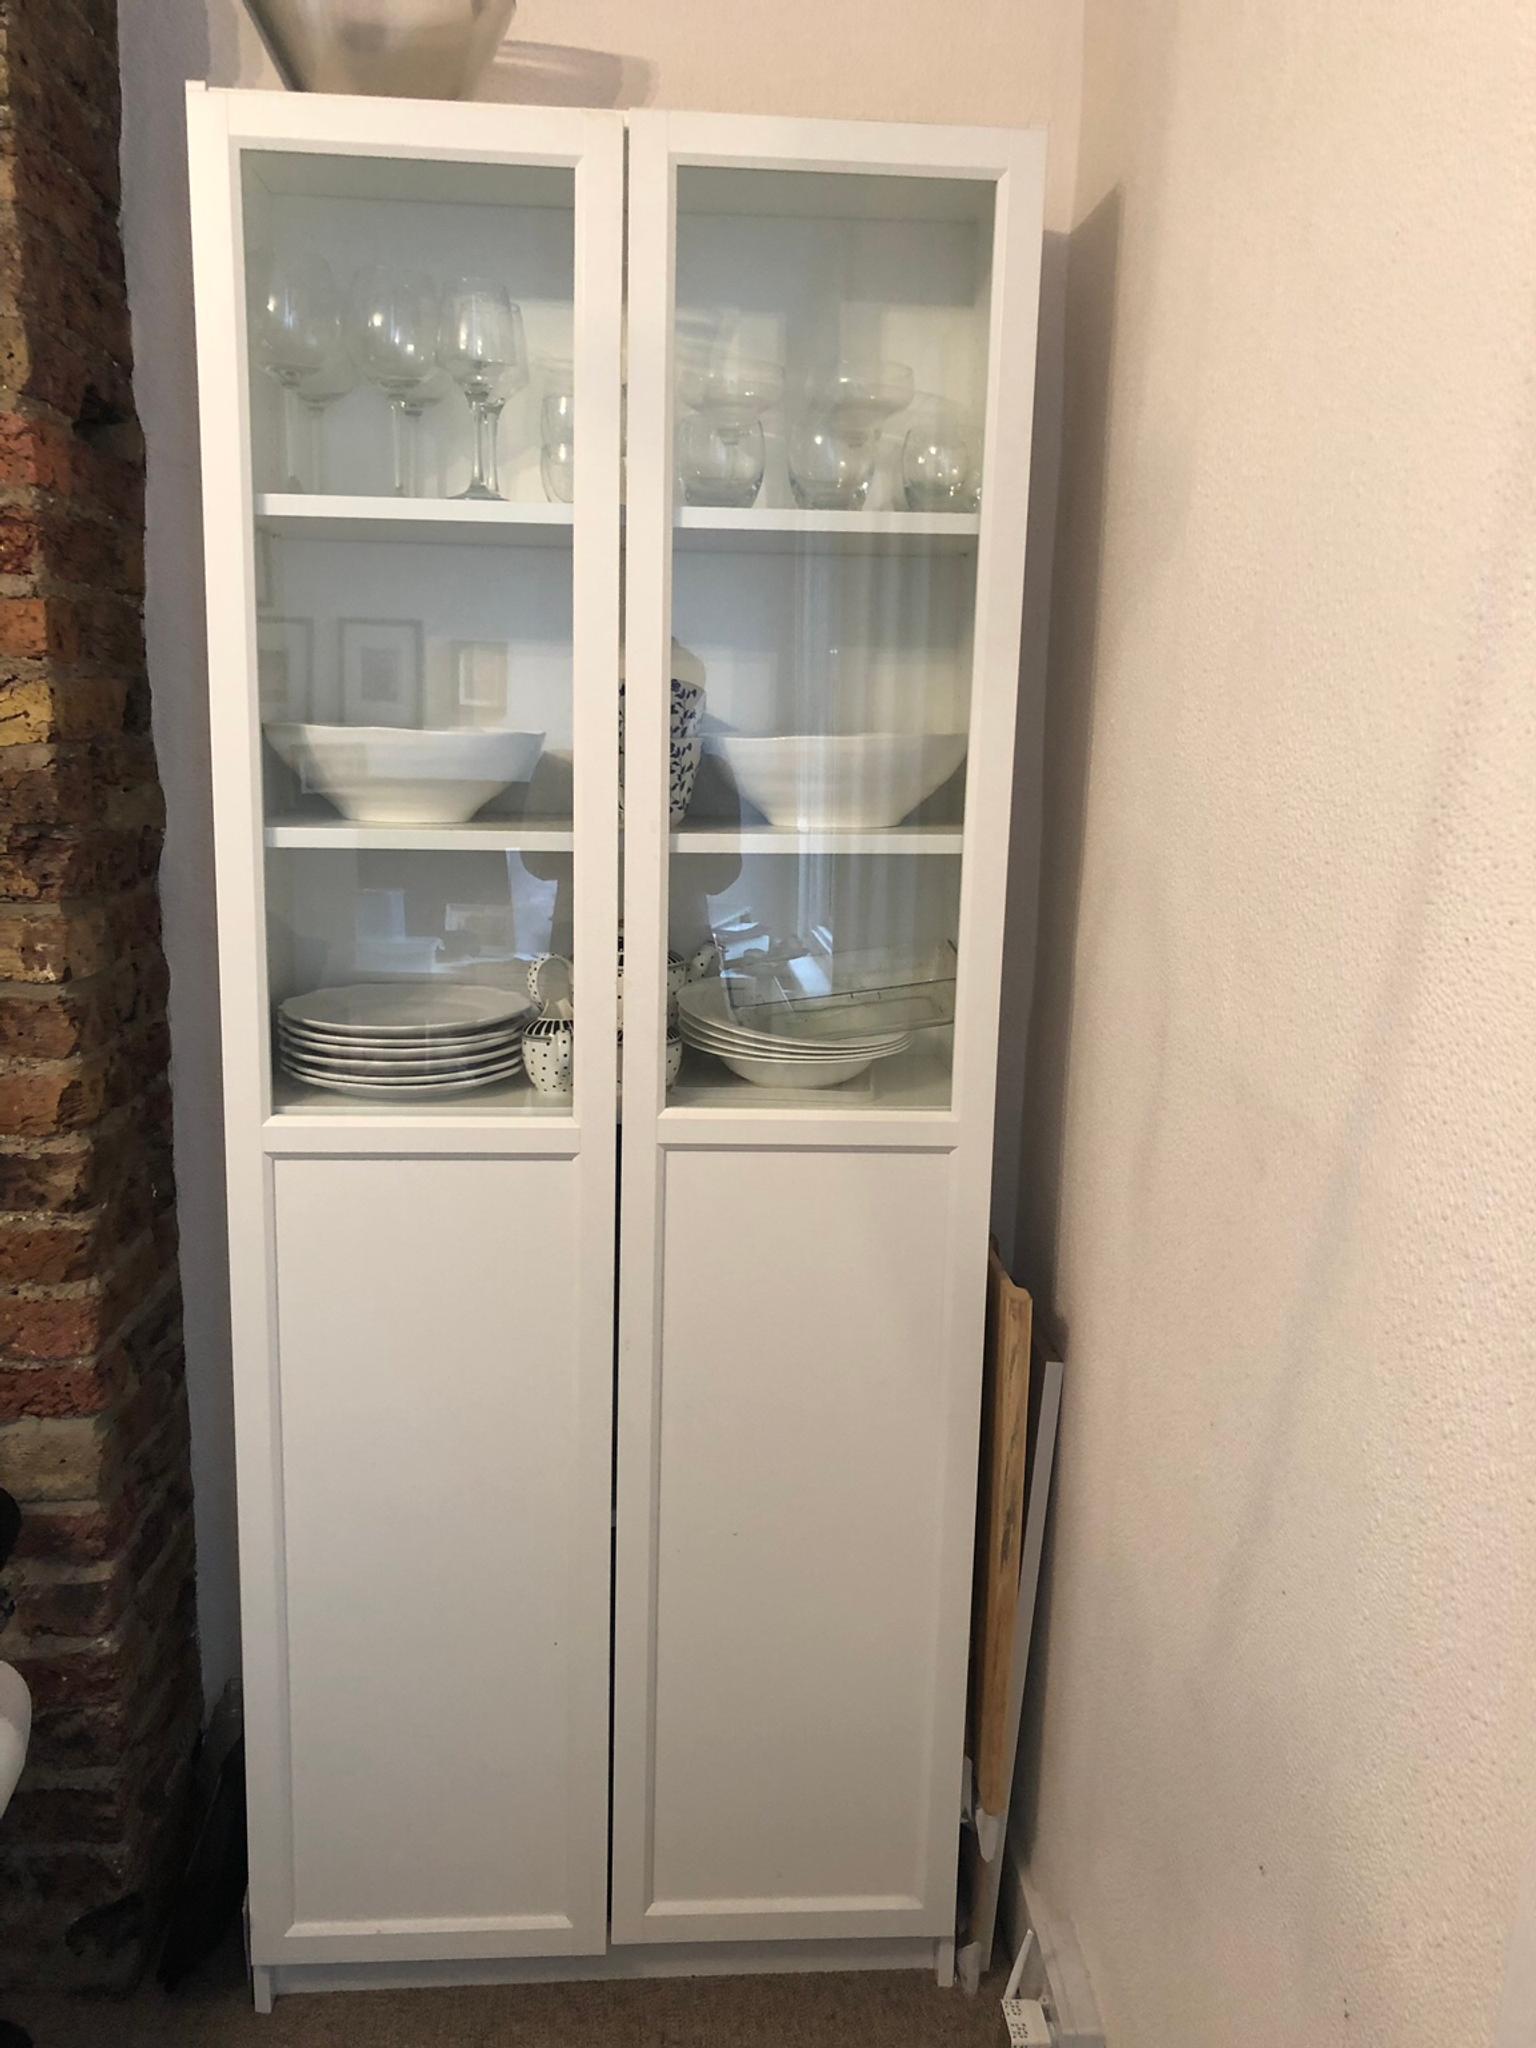 Ikea Billy Bookshelf With Doors In Cr2 London For 50 00 For Sale